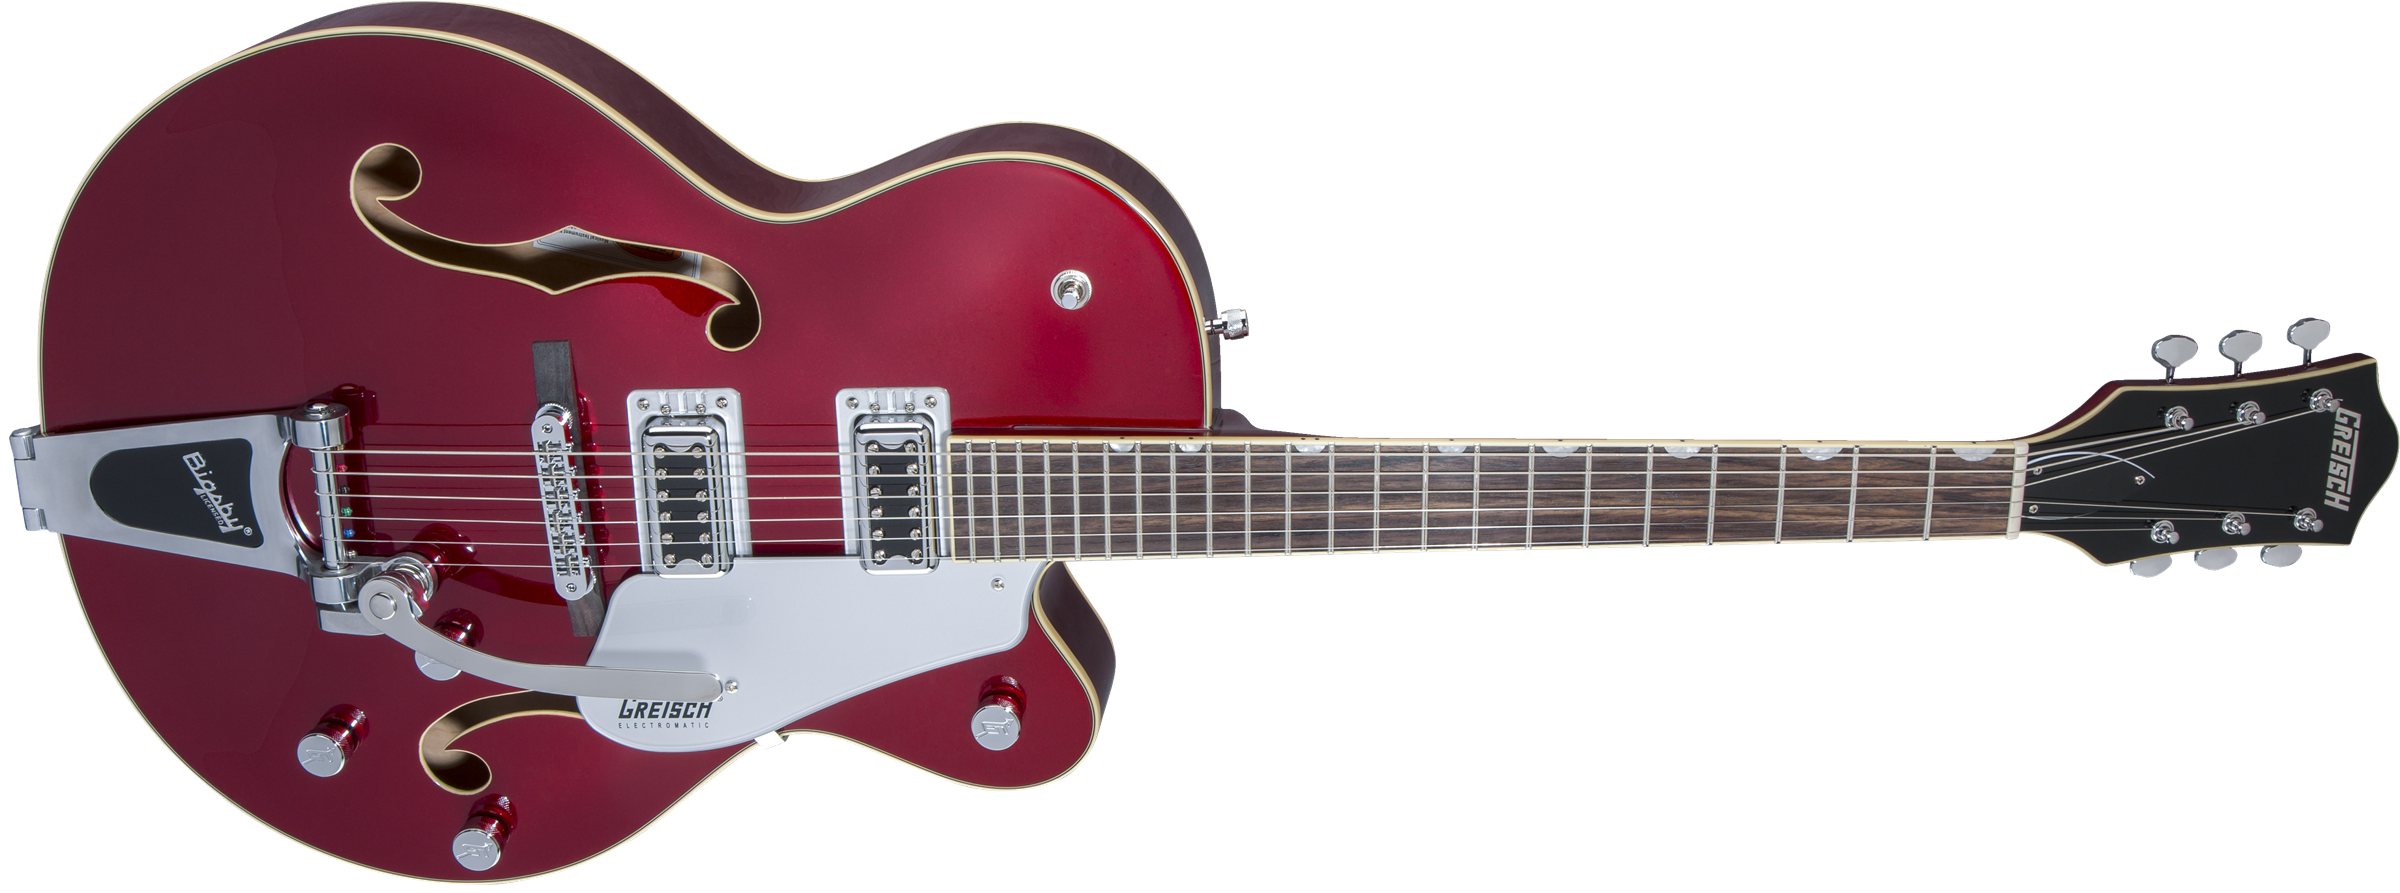 Gretsch G5420t Electromatic Hollow Body 2018 - Candy Apple Red - Semi-hollow electric guitar - Variation 2